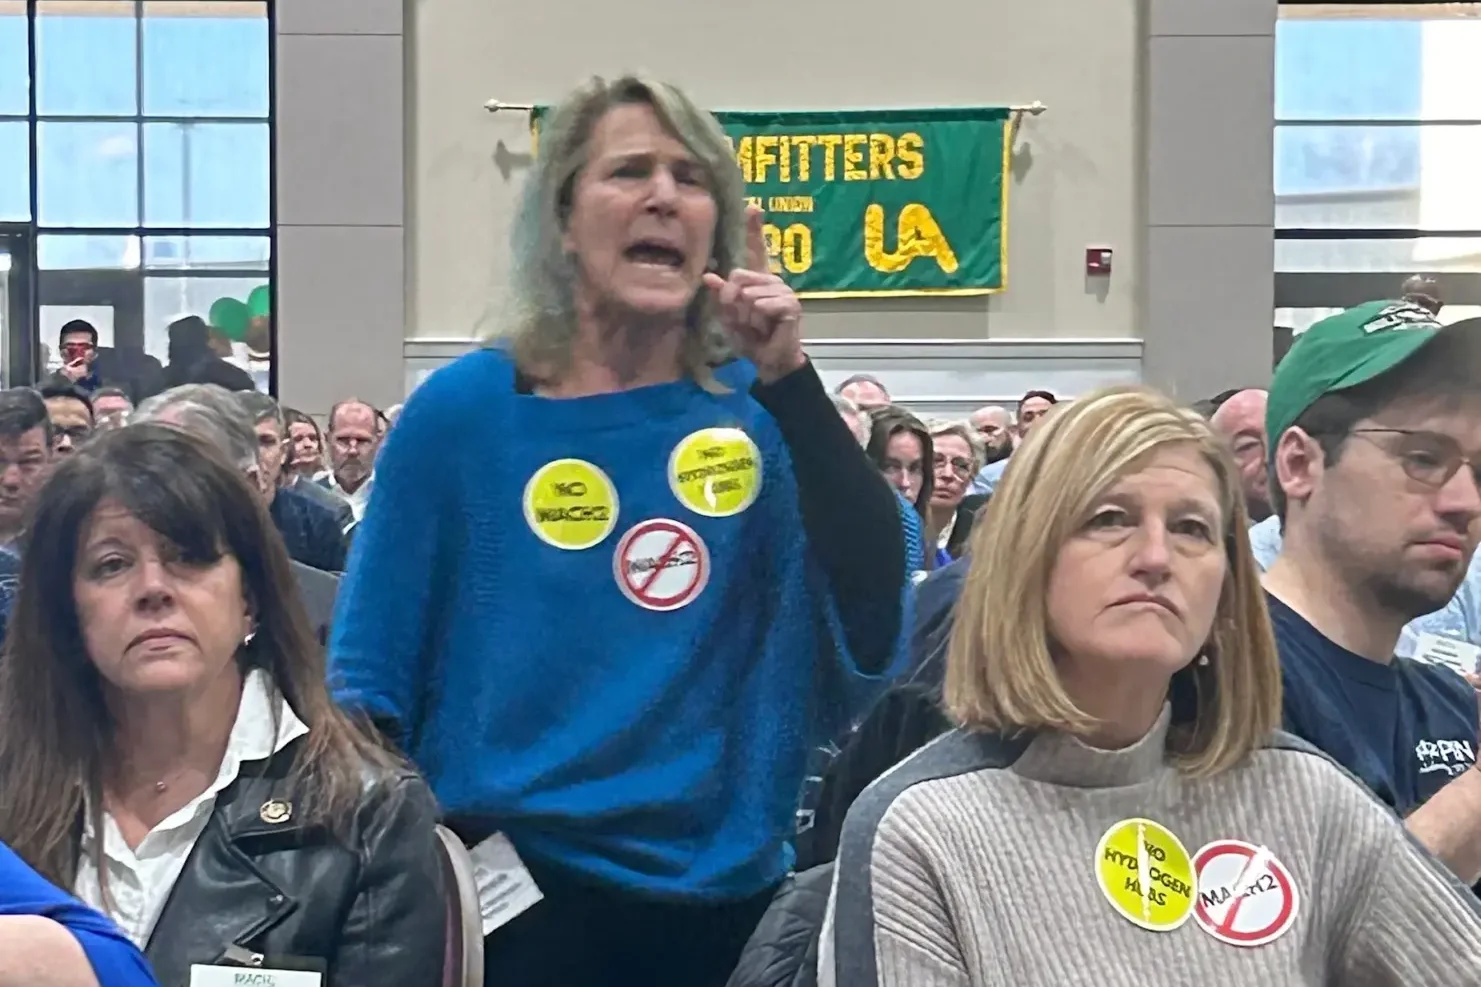 A woman in a blue shirt with protest pins stands in an audience yelling. In front of her are two ther women wearing pins.